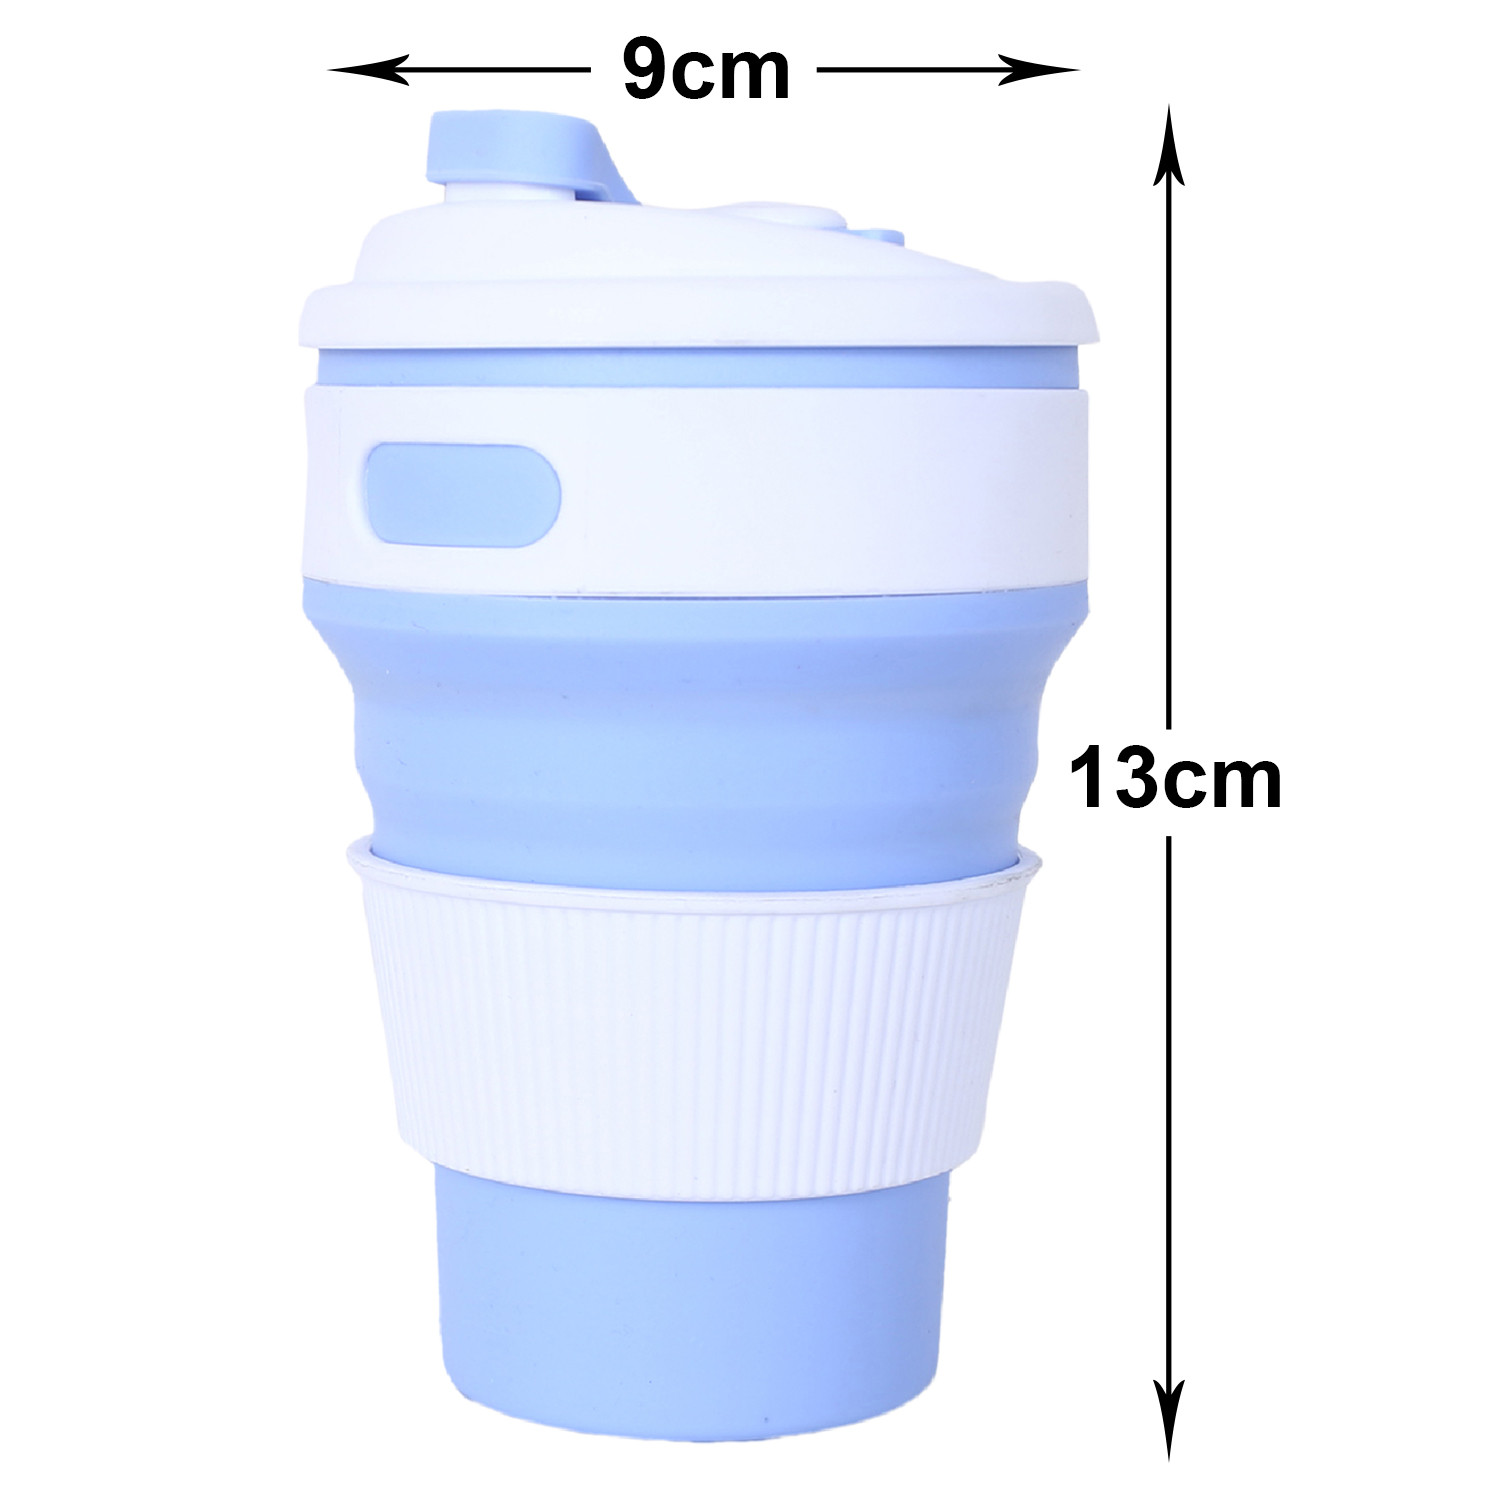 Kuber Industries Collapsible Coffee Cup|Silicone Portable Travel Coffee Mug|Camping Cup with Lid for Travel,Hiking Outdoors,350 ML,(Sky Blue)